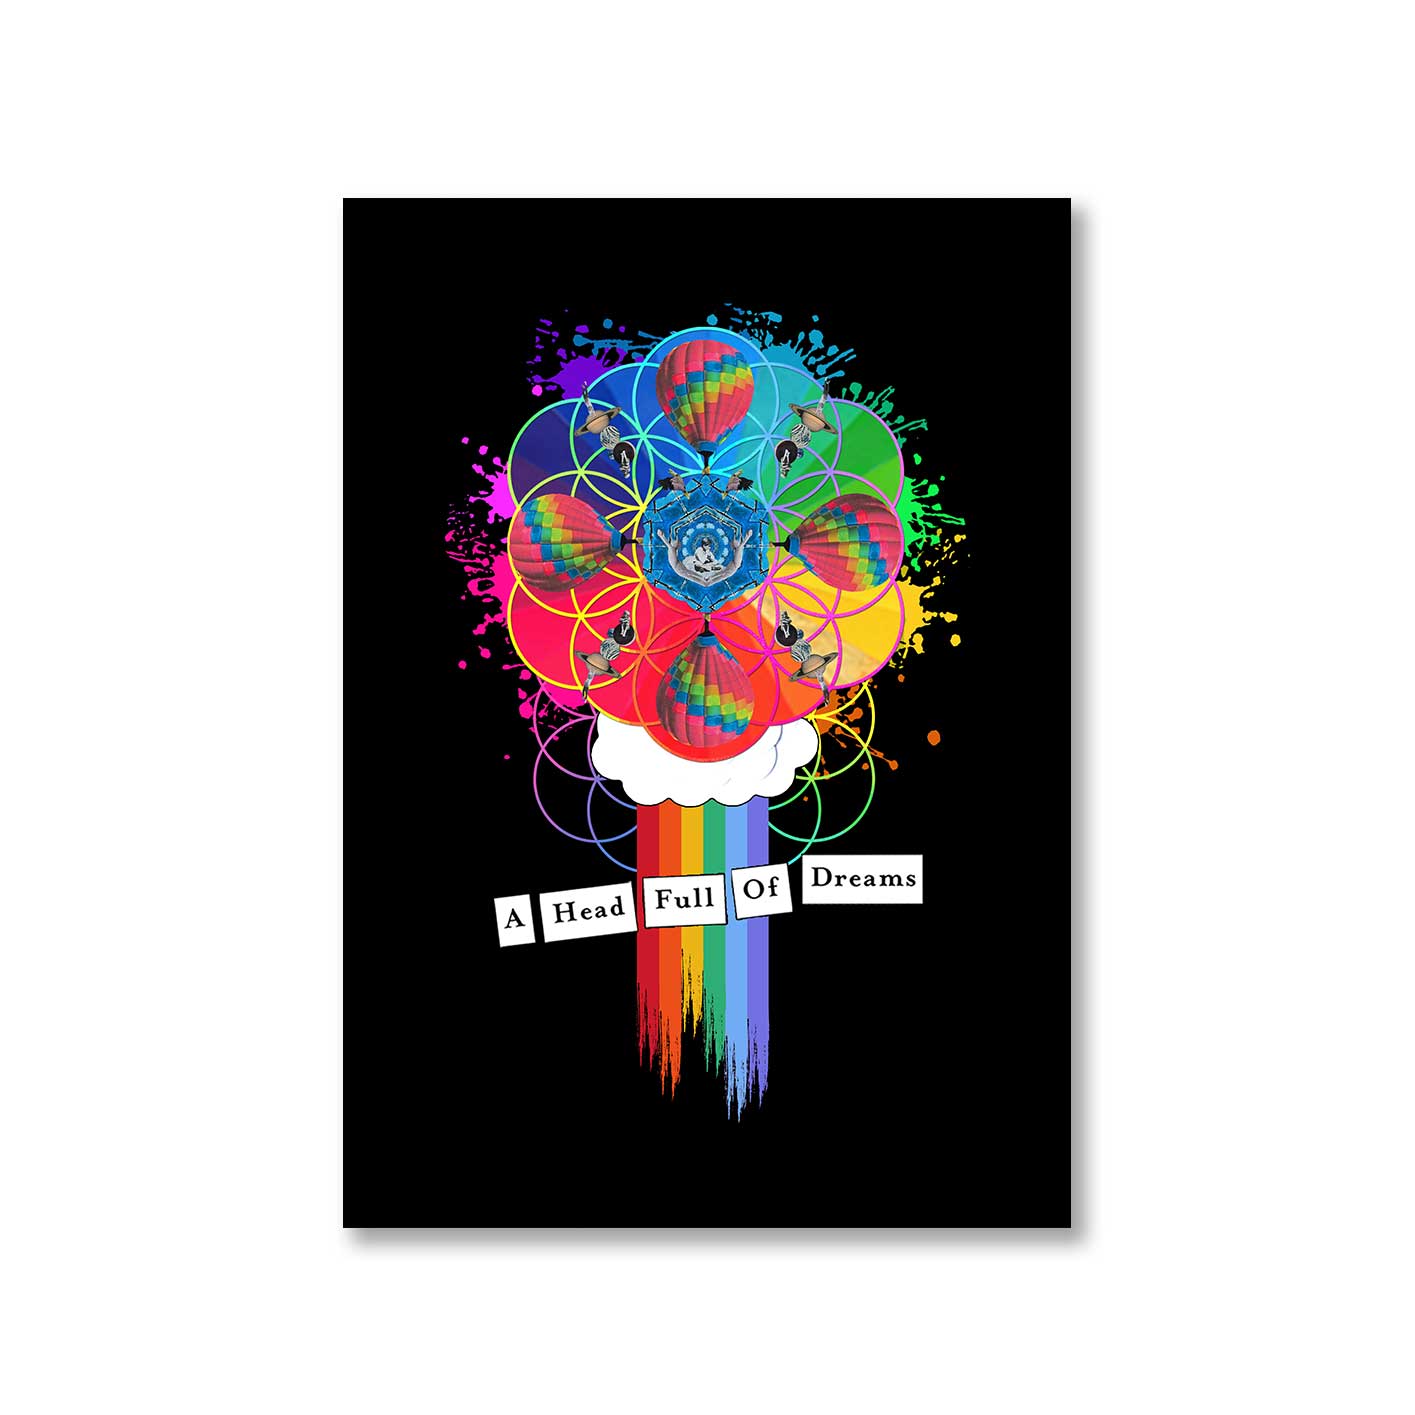 coldplay a head full of dreams poster wall art buy online india the banyan tee tbt a4